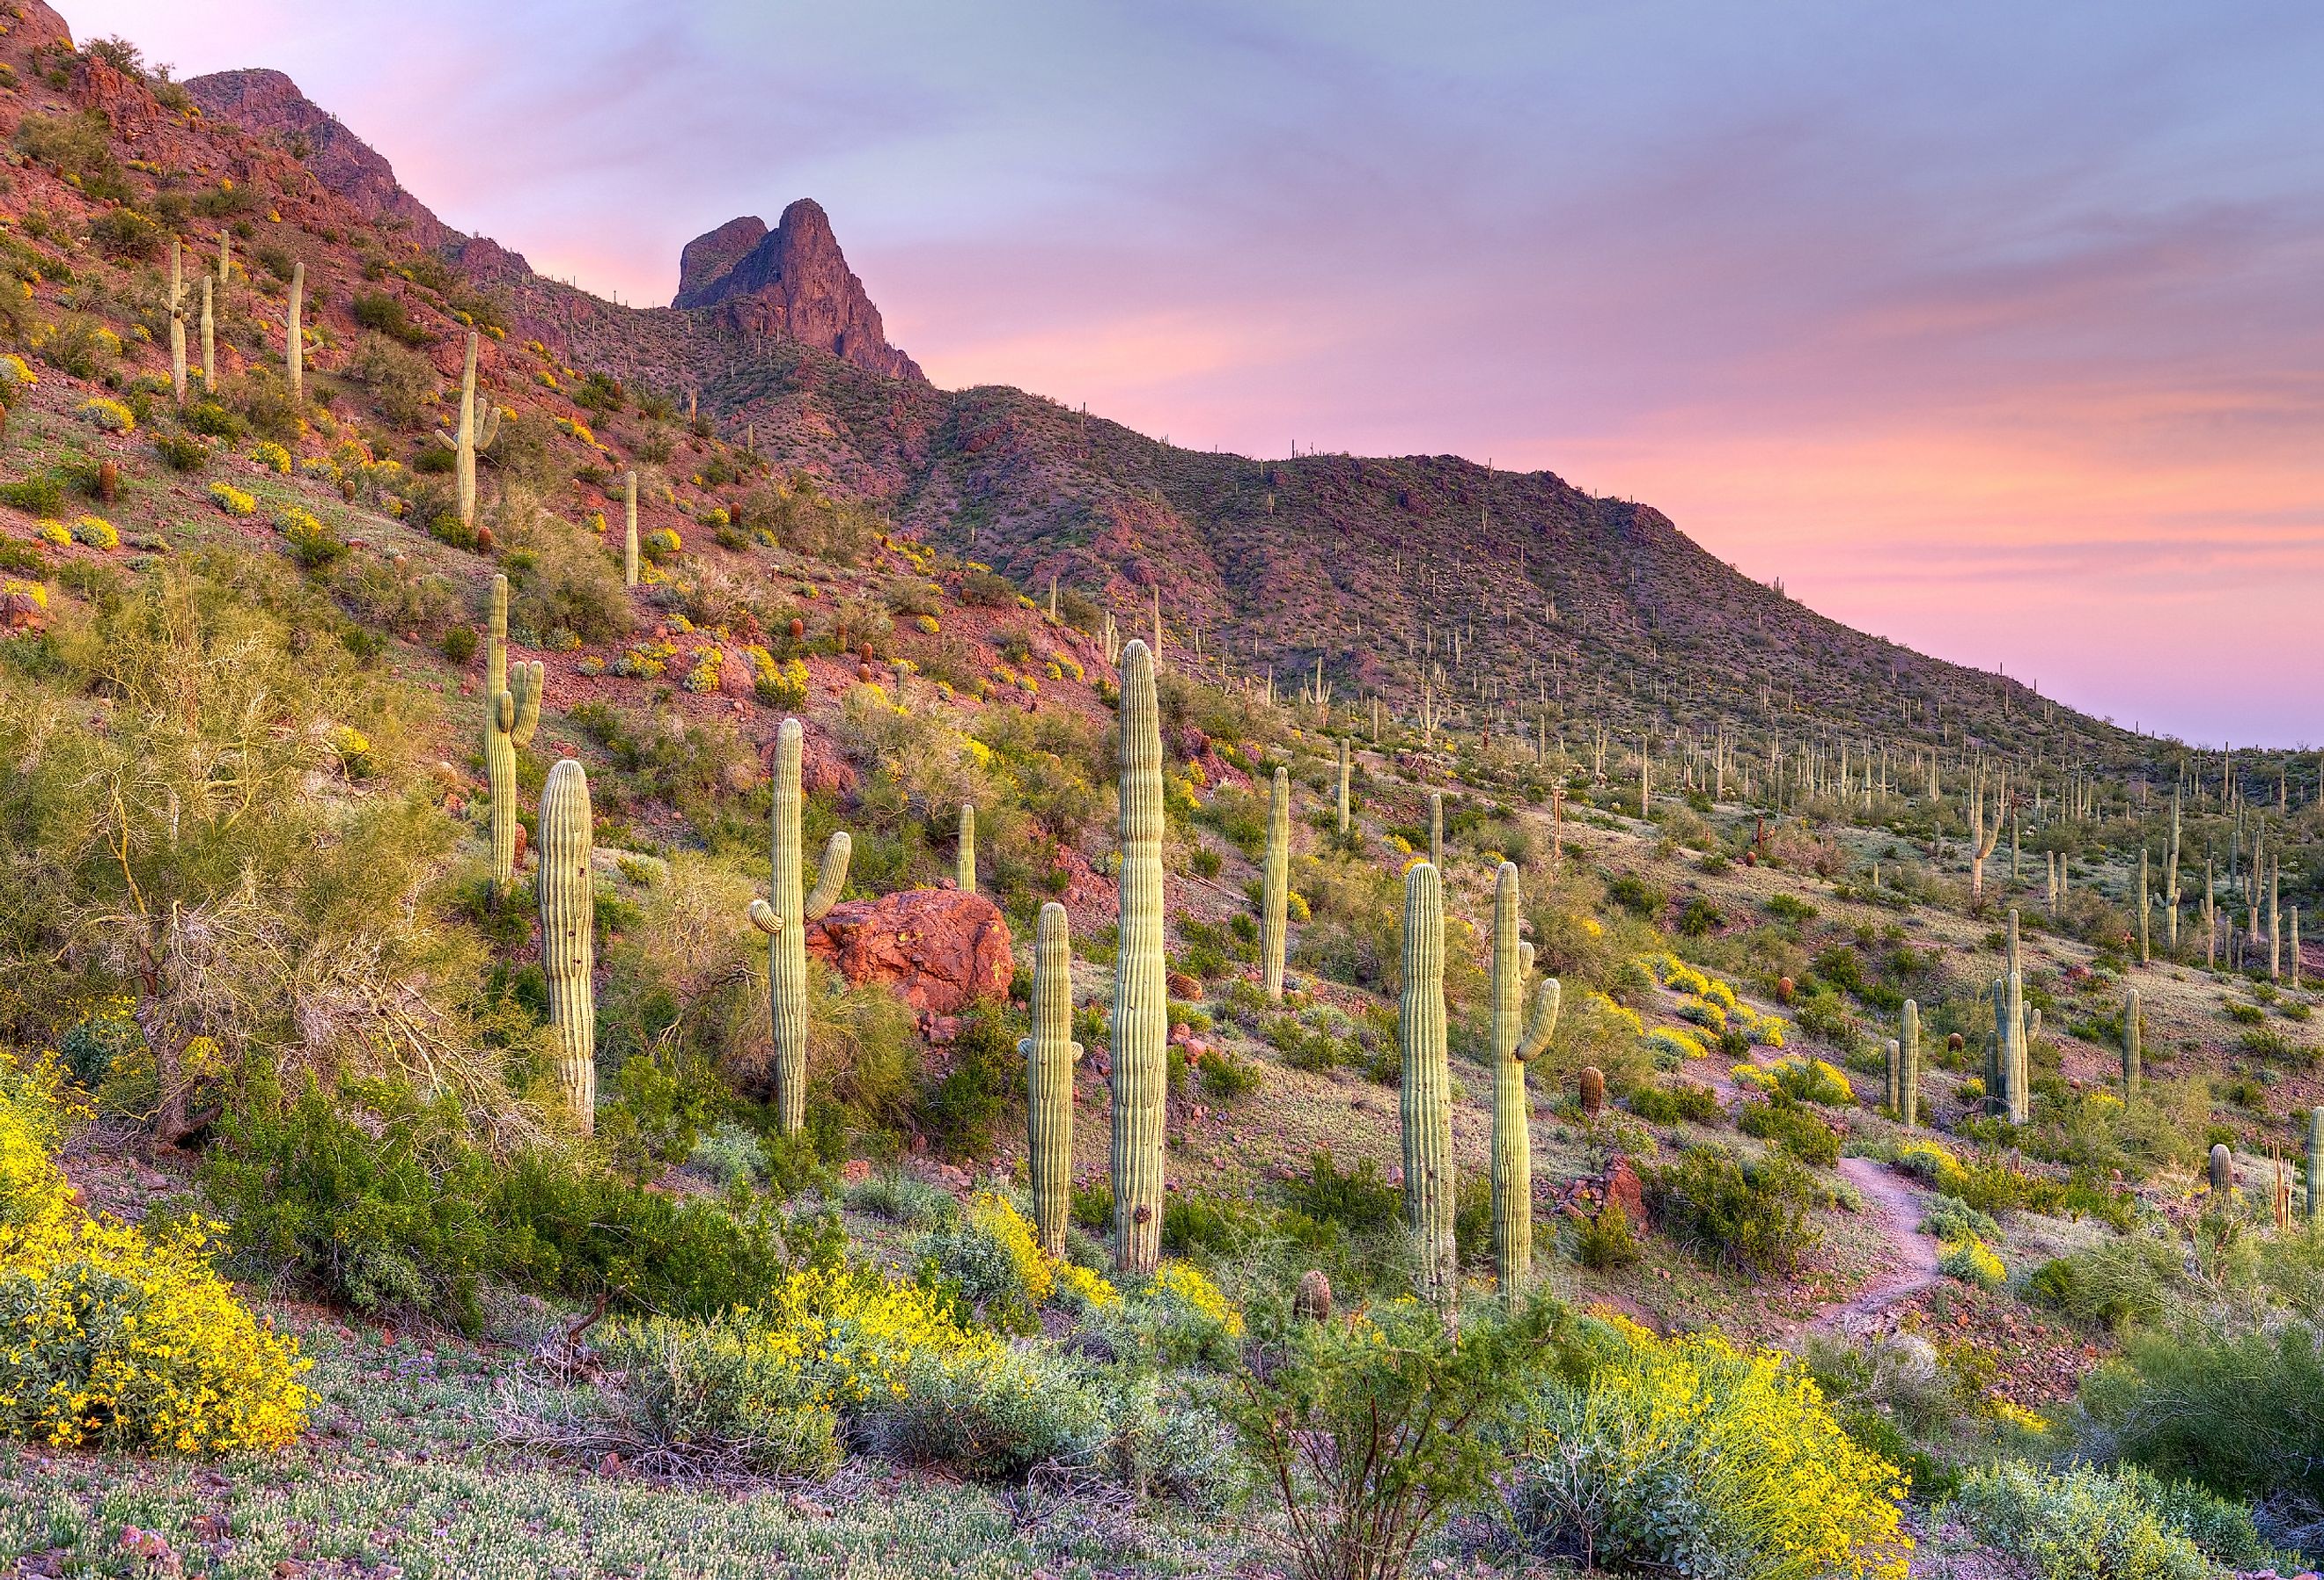 Picacho Peak at sunset, surrounded by a blooming desert.